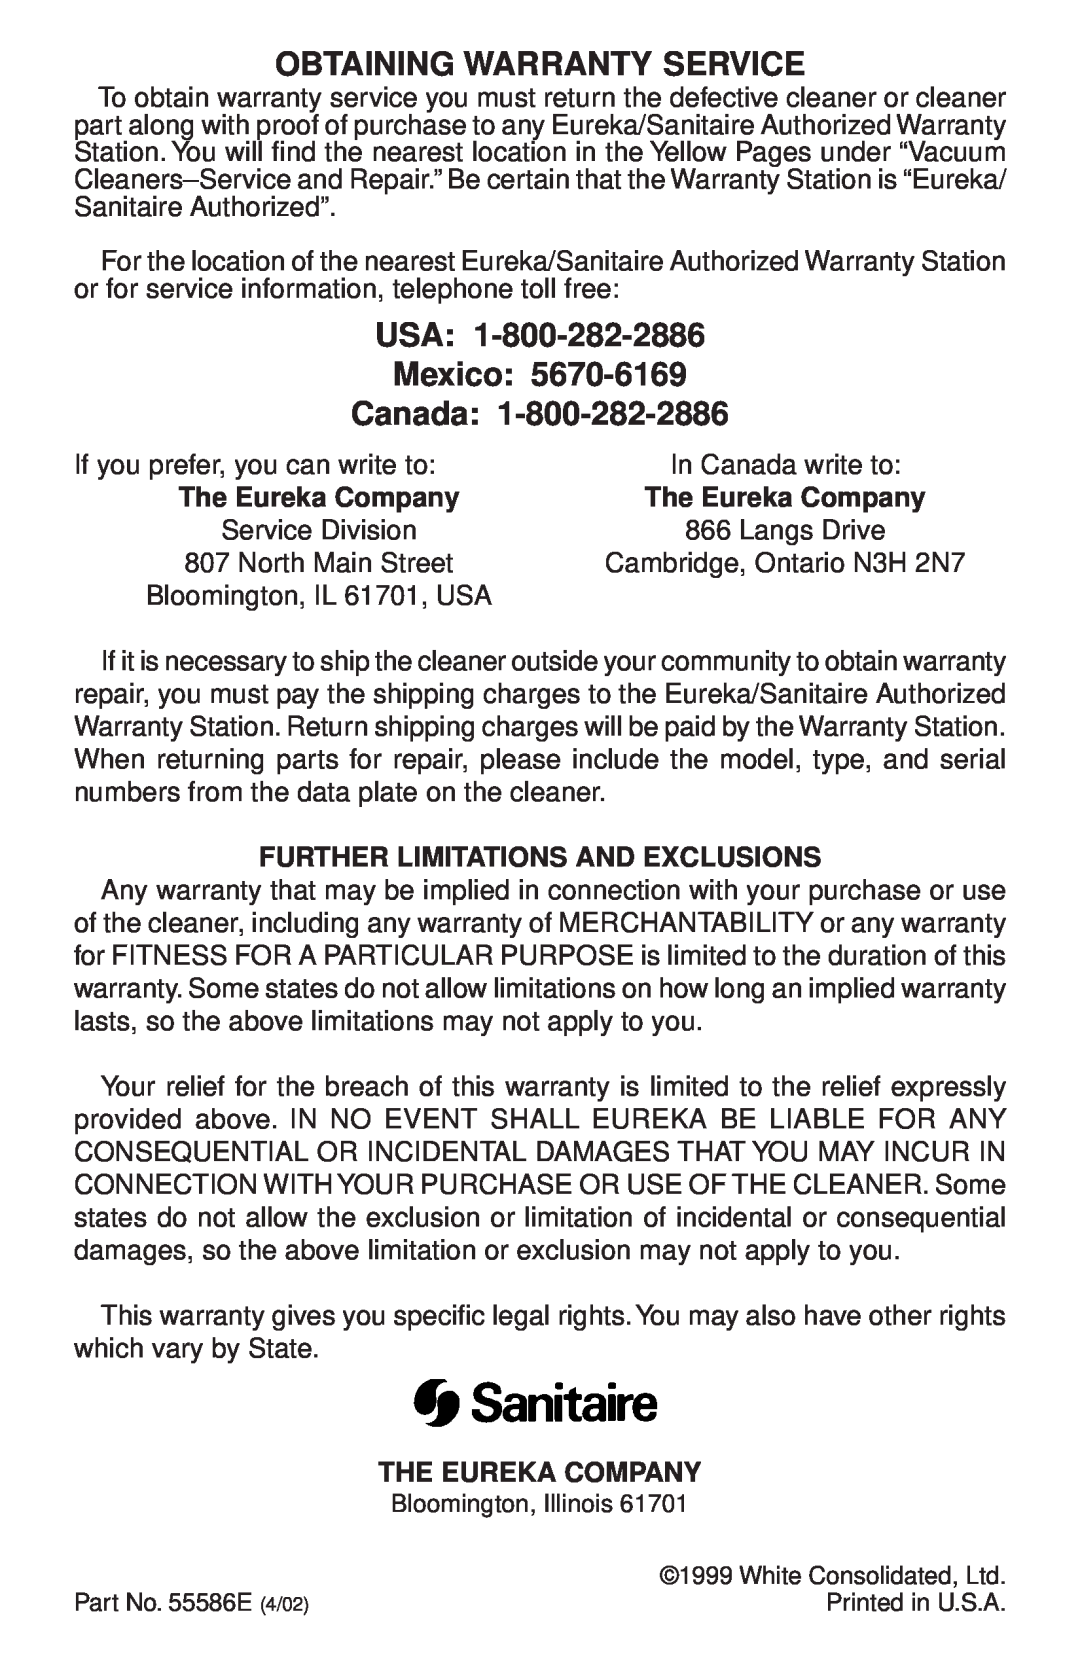 Sanitaire SC899 Obtaining Warranty Service, USA Mexico Canada, The Eureka Company, Further Limitations And Exclusions 